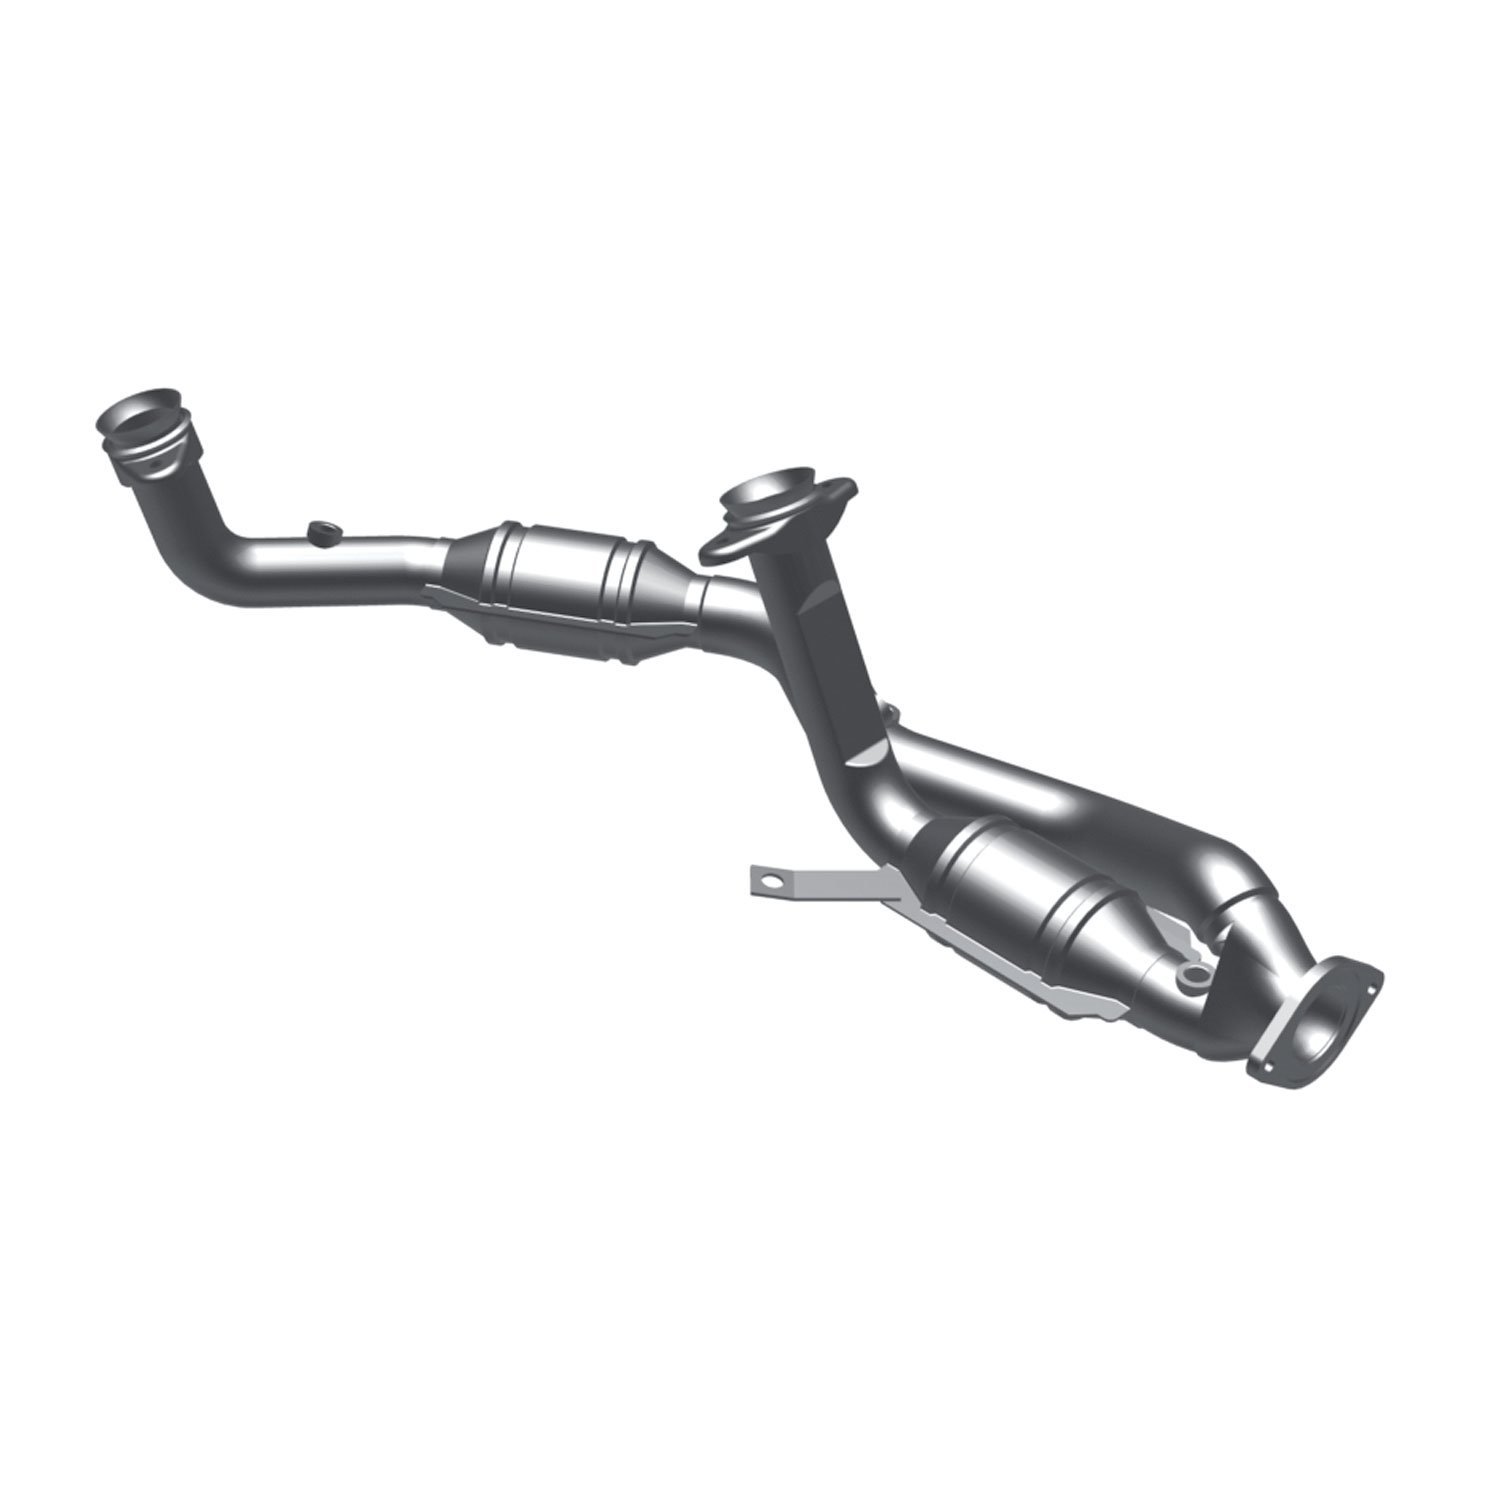 1996-1999 Ford Taurus HM Grade Federal / EPA Compliant Direct-Fit Catalytic Converter